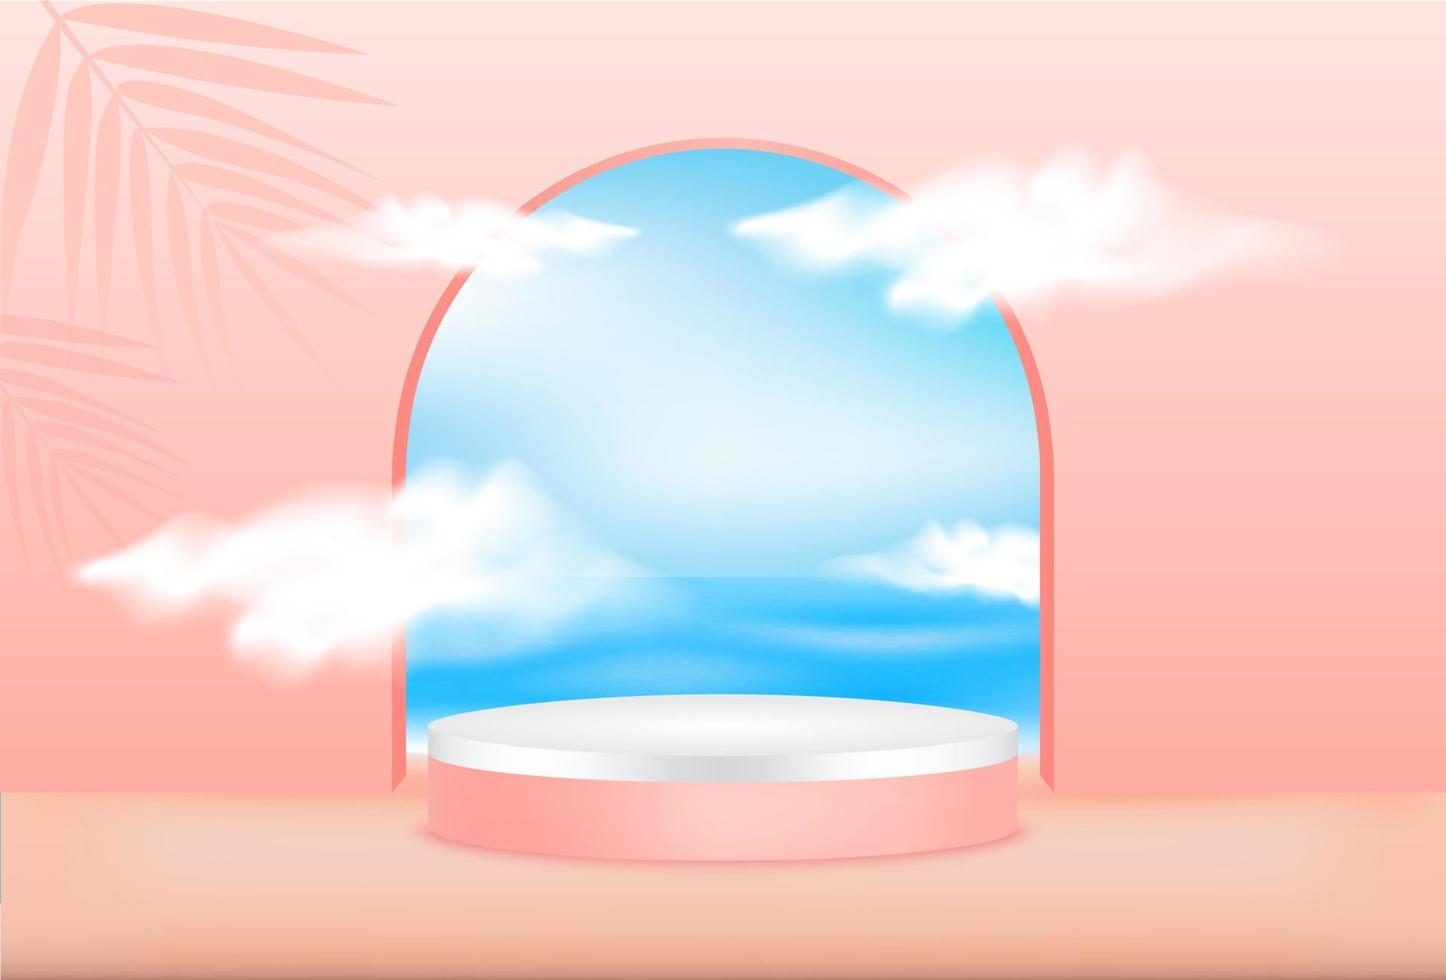 Cosmetic pink premium podium display for product presentation branding and packaging. Studio stage with shadow of leaf and sea sky cloud background. 3d vector design abstract.